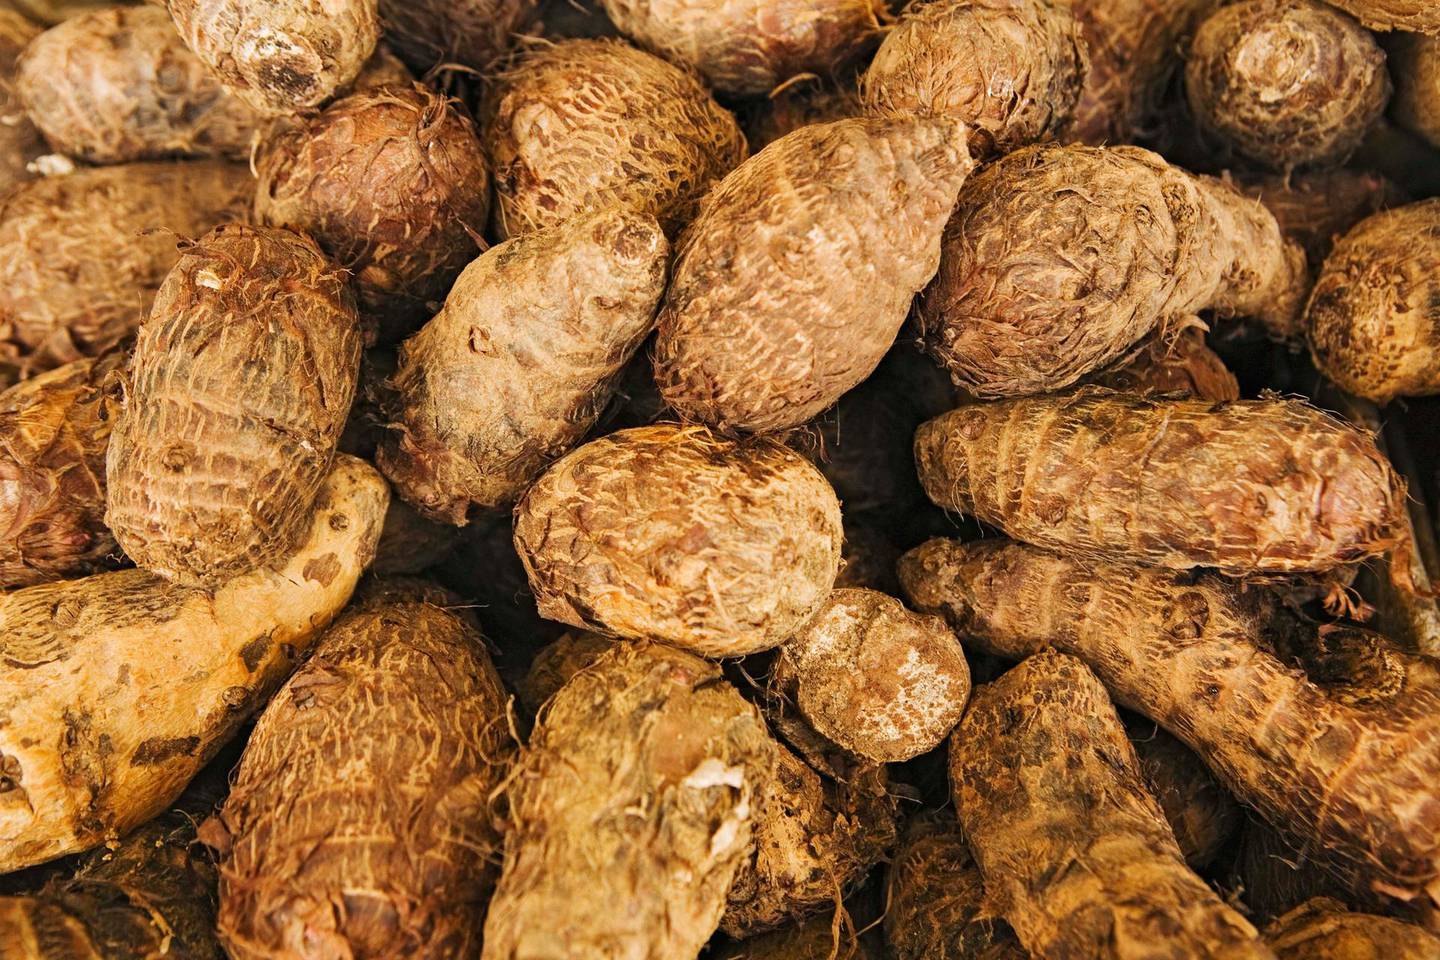 Taro root sold in a public market. Getty Images